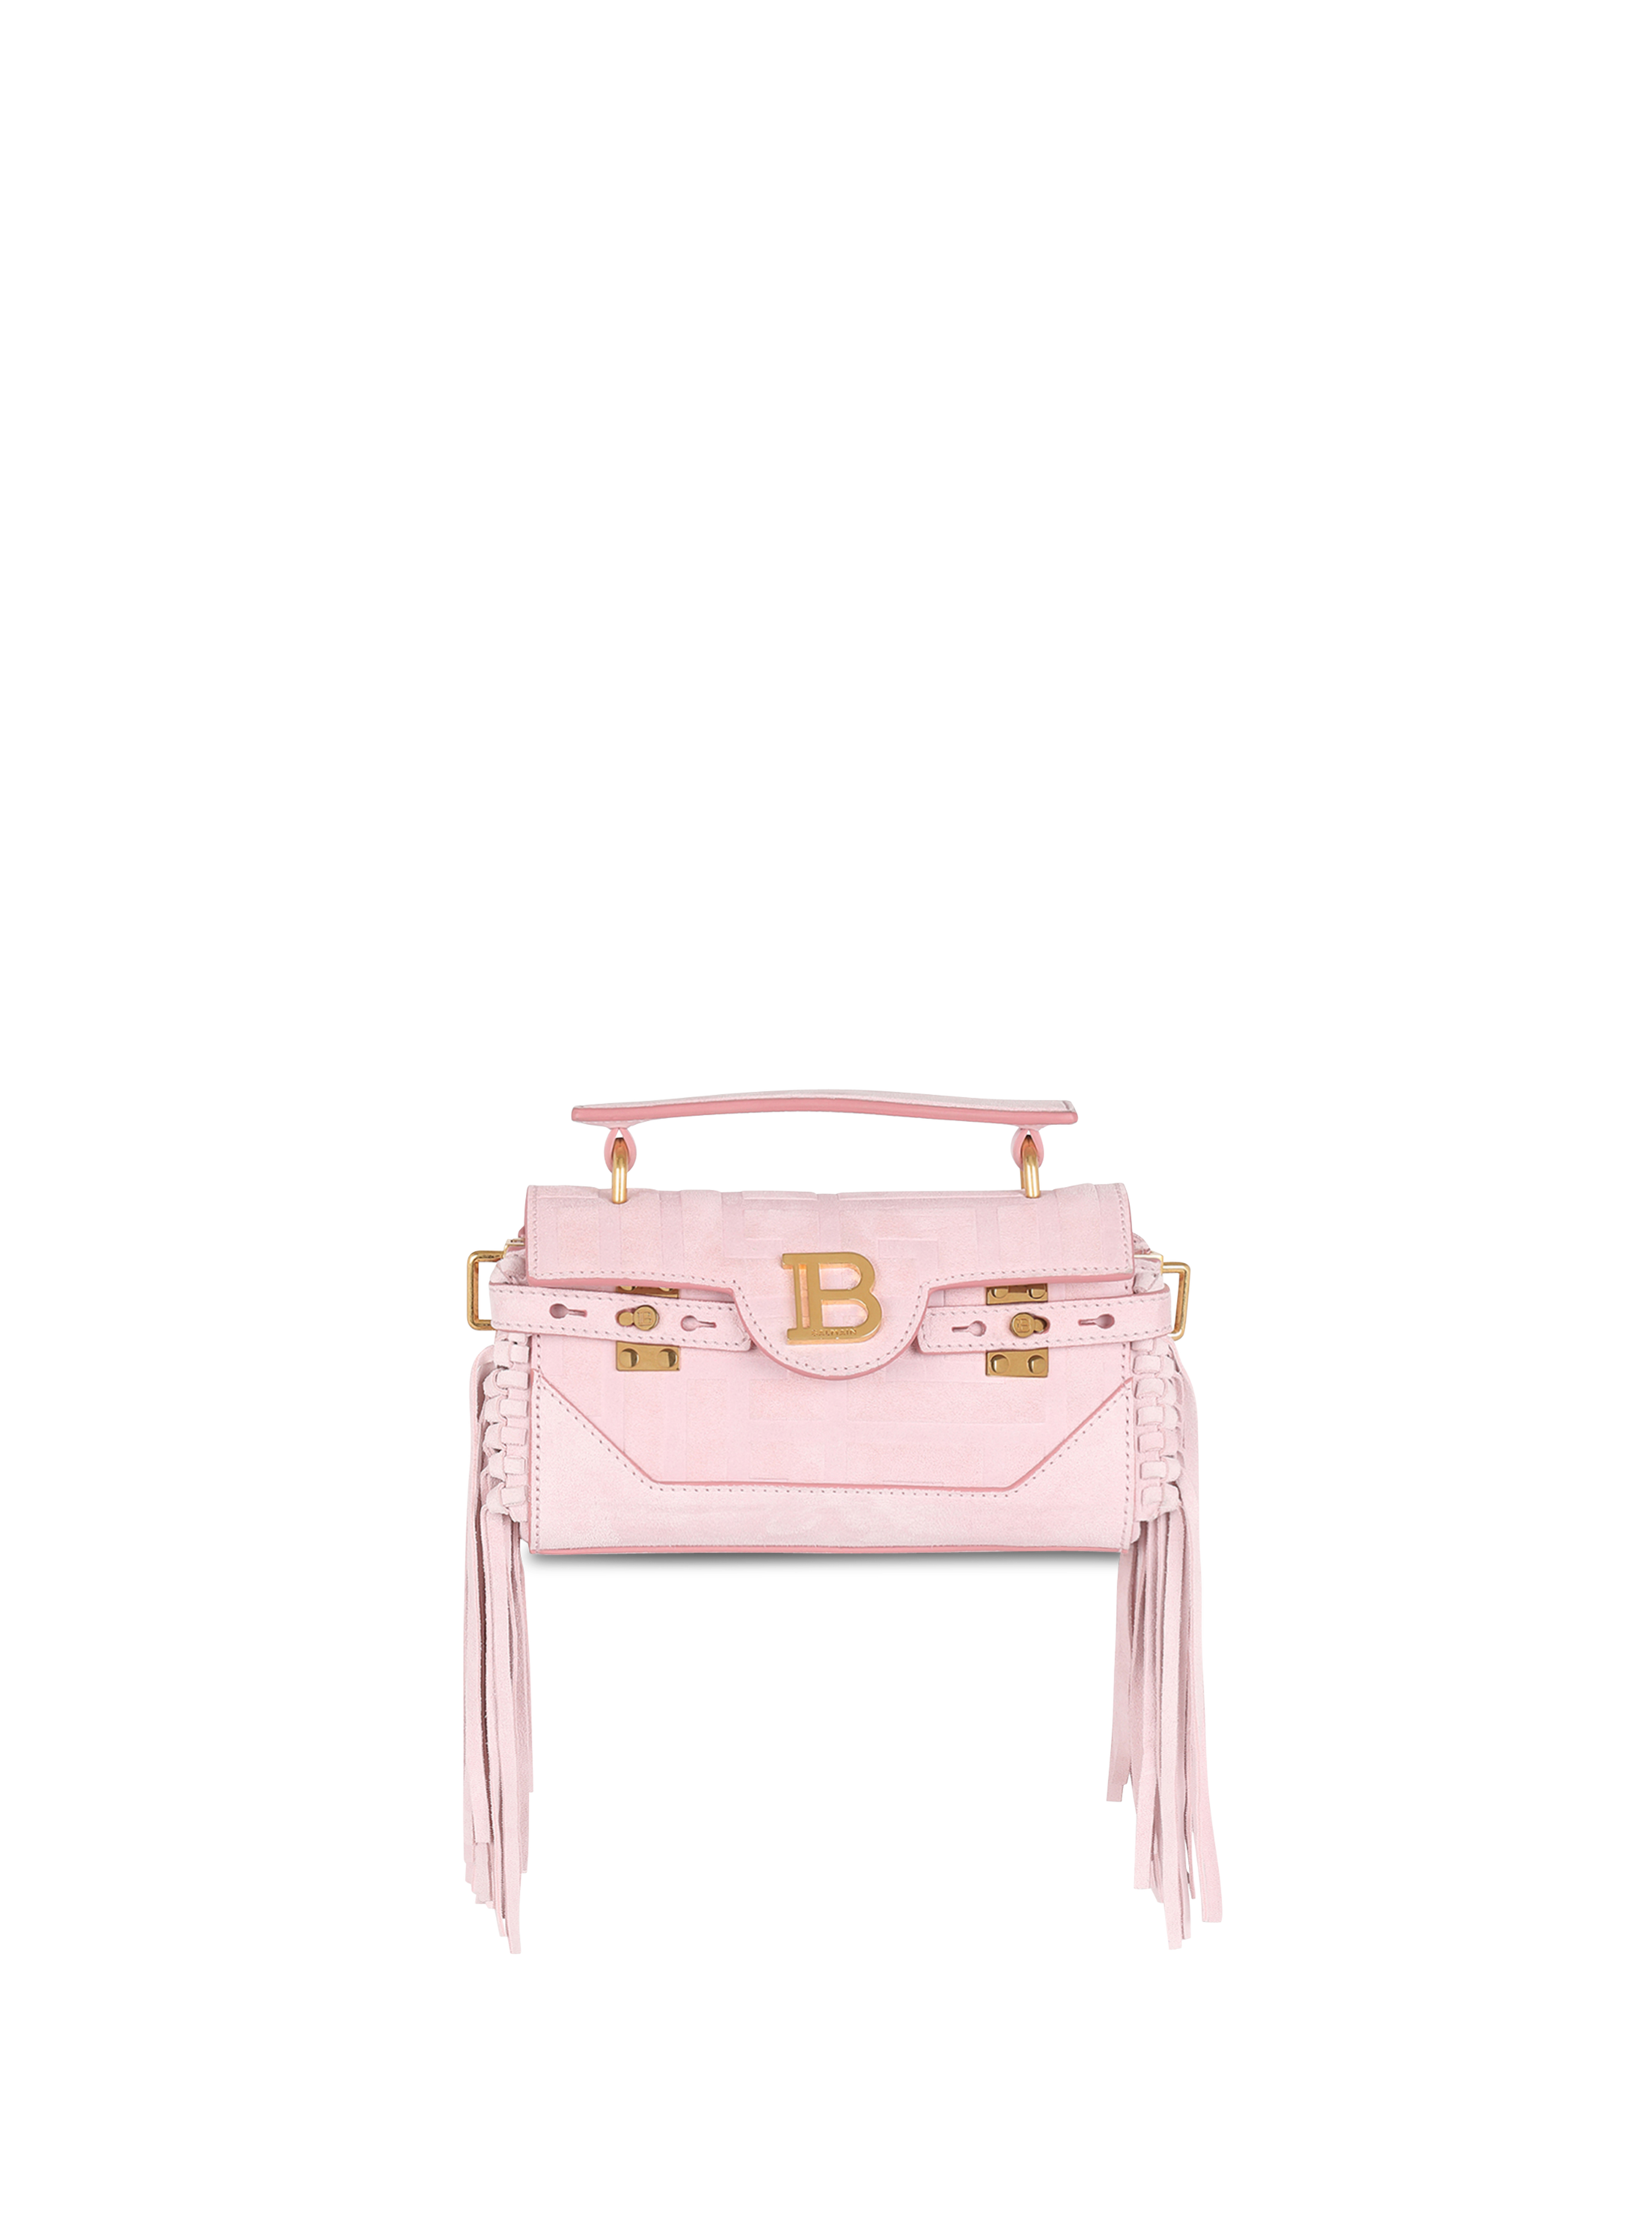 Suede B-Buzz 19 baguette bag with fringe, pink